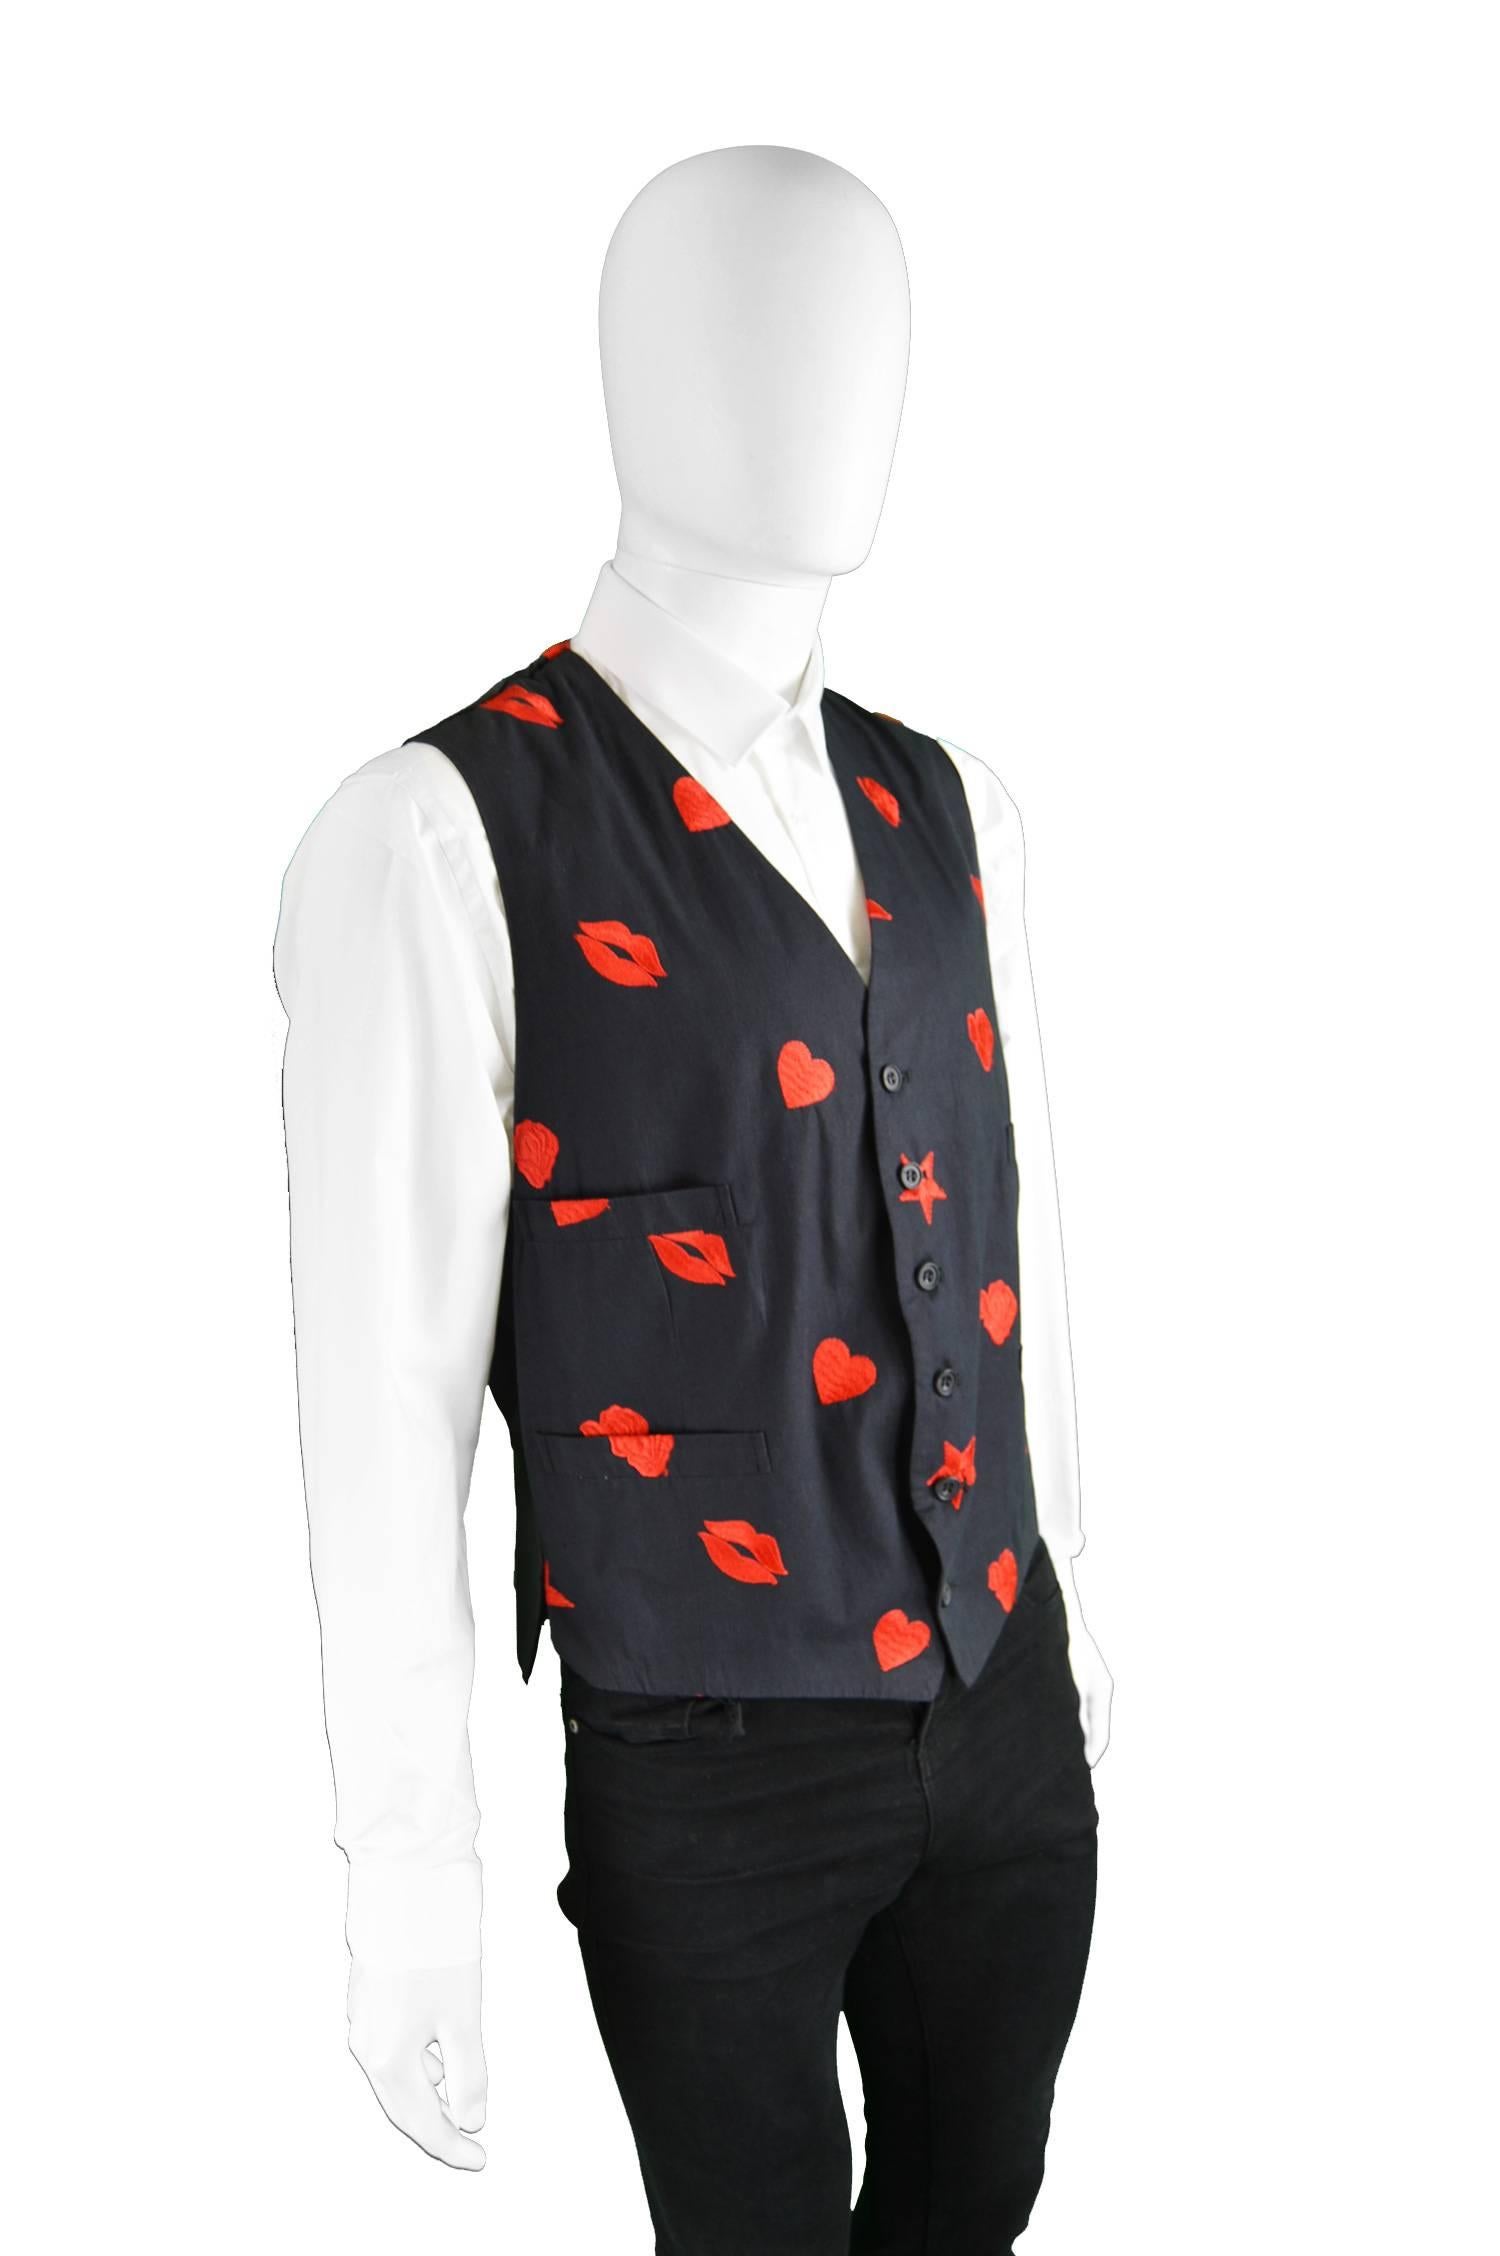 Paul Smith Men's Vintage Black & Red Embroidered Waistcoat, 1990s 1